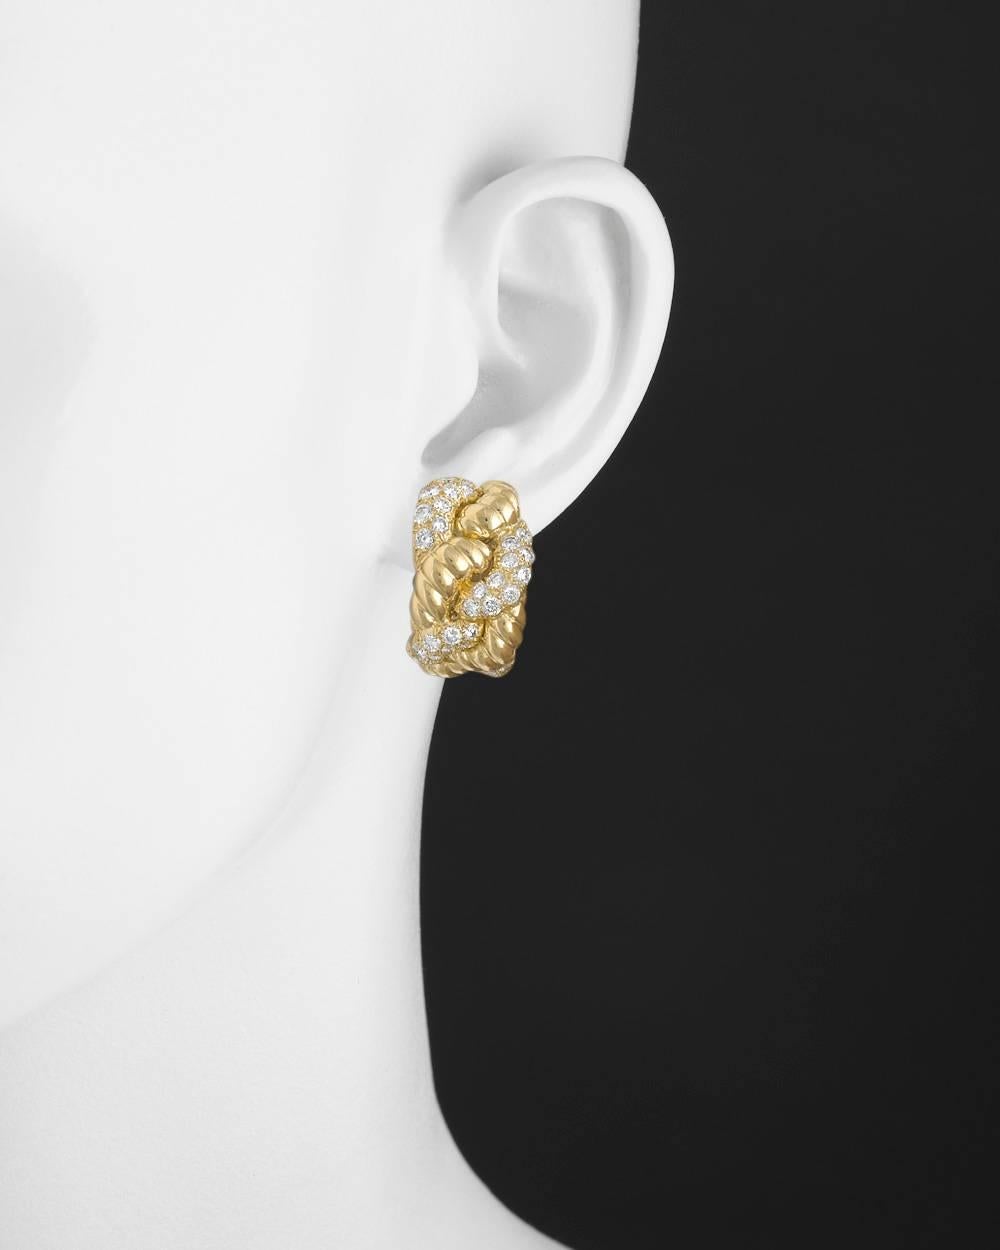 Gold and diamond woven earclips, set with fine colorless round brilliant-cut diamonds weighing approximately 3.12 total carats (F color, VVS1-VVS2 clarity), in 18k yellow gold, signed Boucheron. Clip backs. Just under 1" long and 0.6" wide